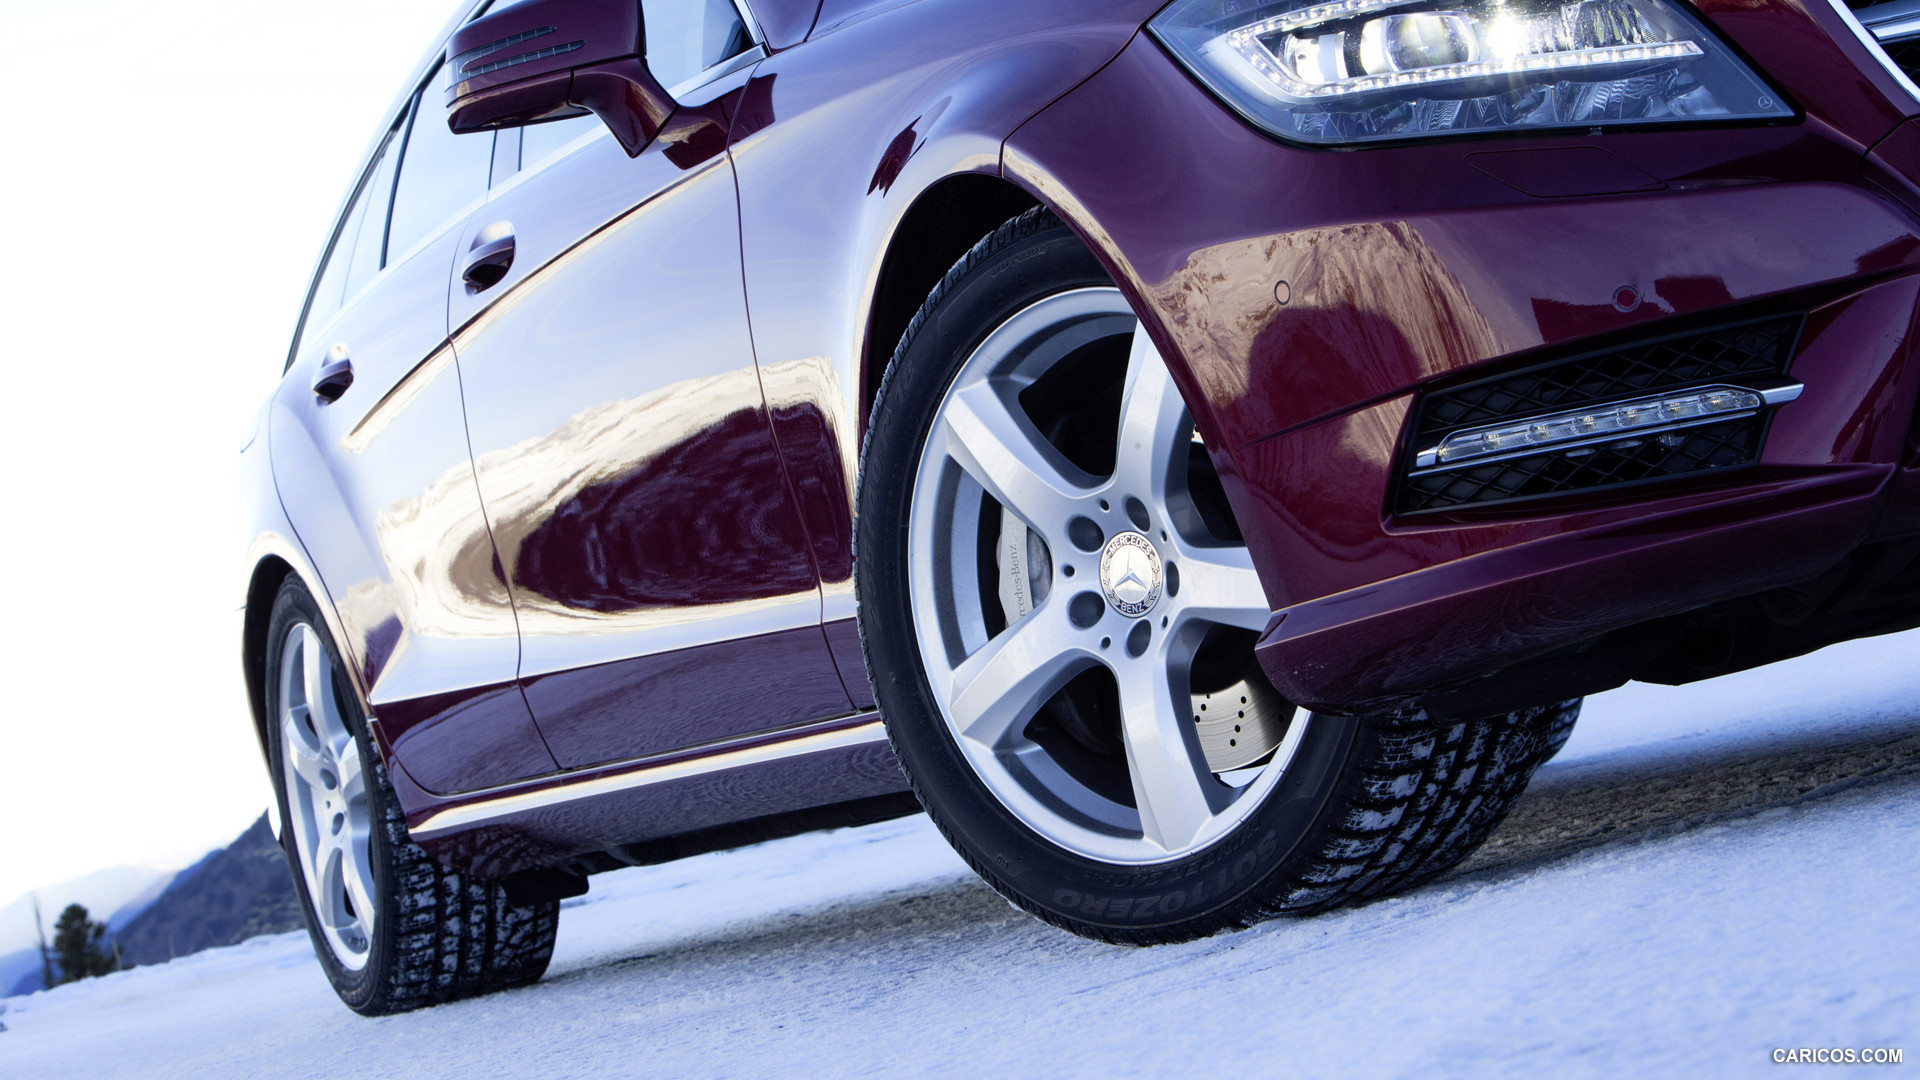 2013 Mercedes-Benz CLS 500 4MATIC Shooting Brake on Snow - Wheel, #162 of 184